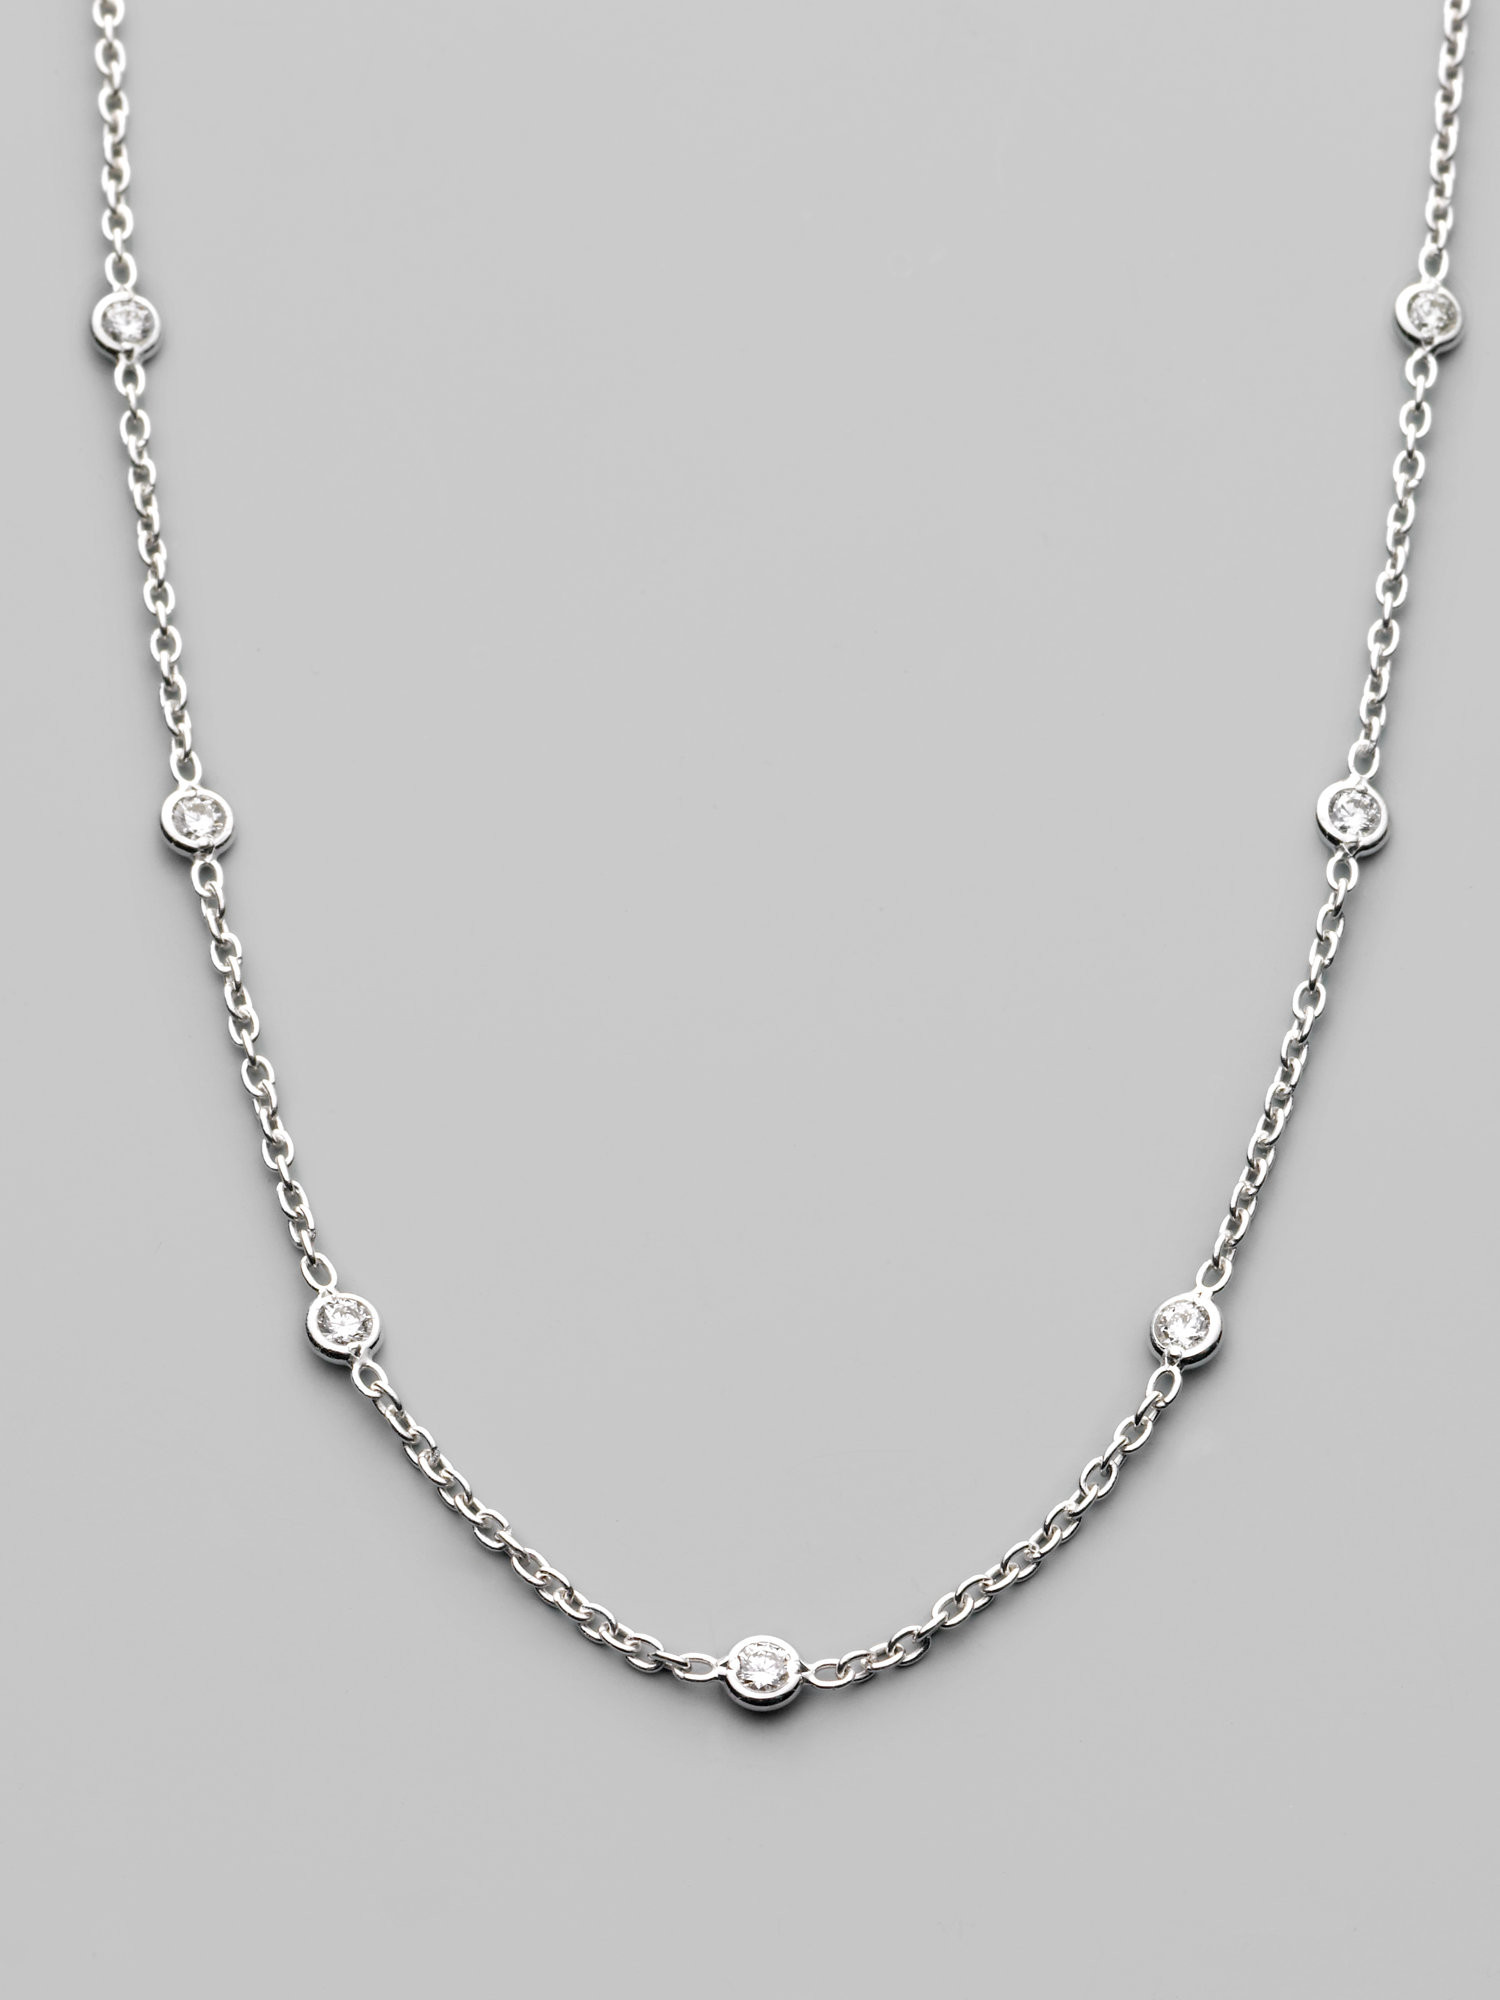 Diamond Station Necklace
 Roberto coin Diamond & 18k White Gold Station Necklace in